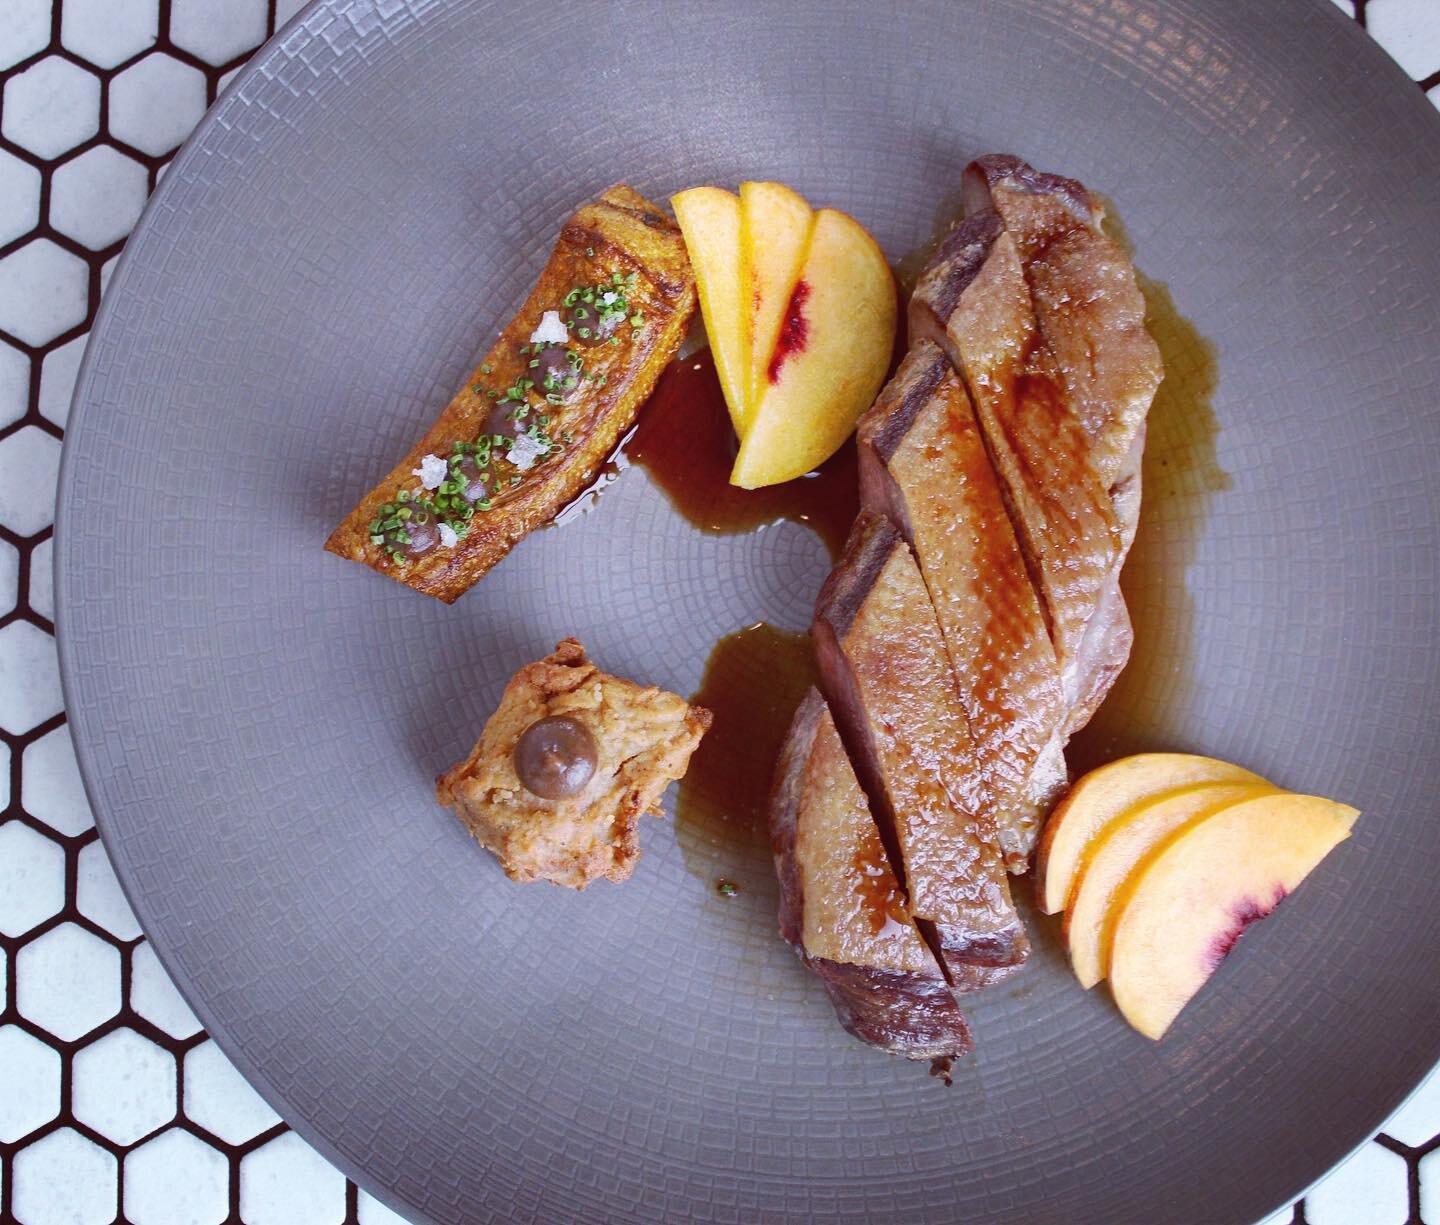 38 North Duck Breast
Buttermilk Fried Rillettes &bull; Stone Fruit
Smoked Squash &bull; Date BBQ Sauce

Currently on our dinner menu for al fresco dining or curbside pick-up. 

Click the link in our bio for ordering or reservations!